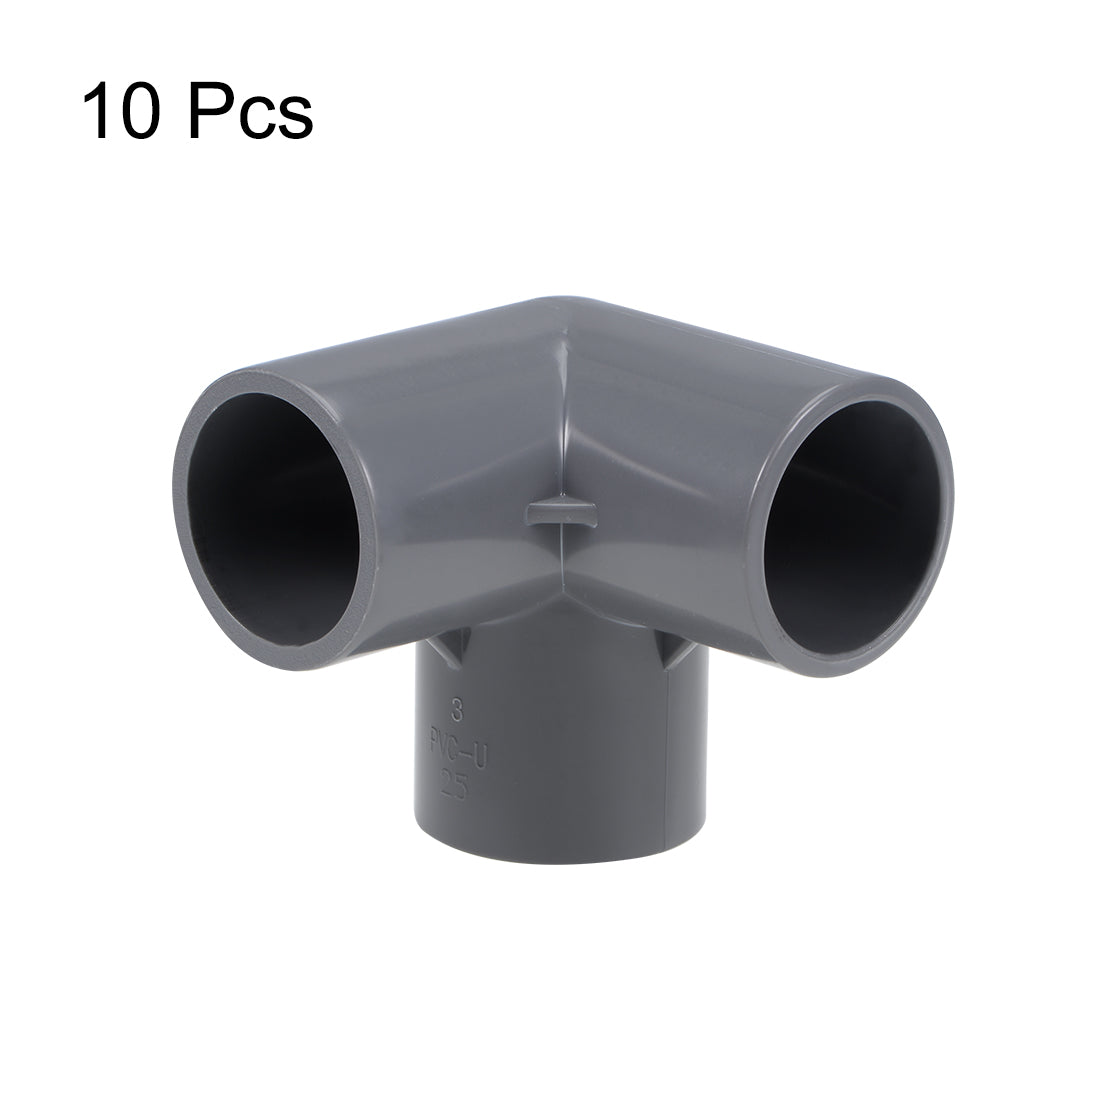 uxcell Uxcell 3-Way Elbow Metric PVC Fitting, 25mm Socket, Tee Corner Fittings Gray 10Pcs